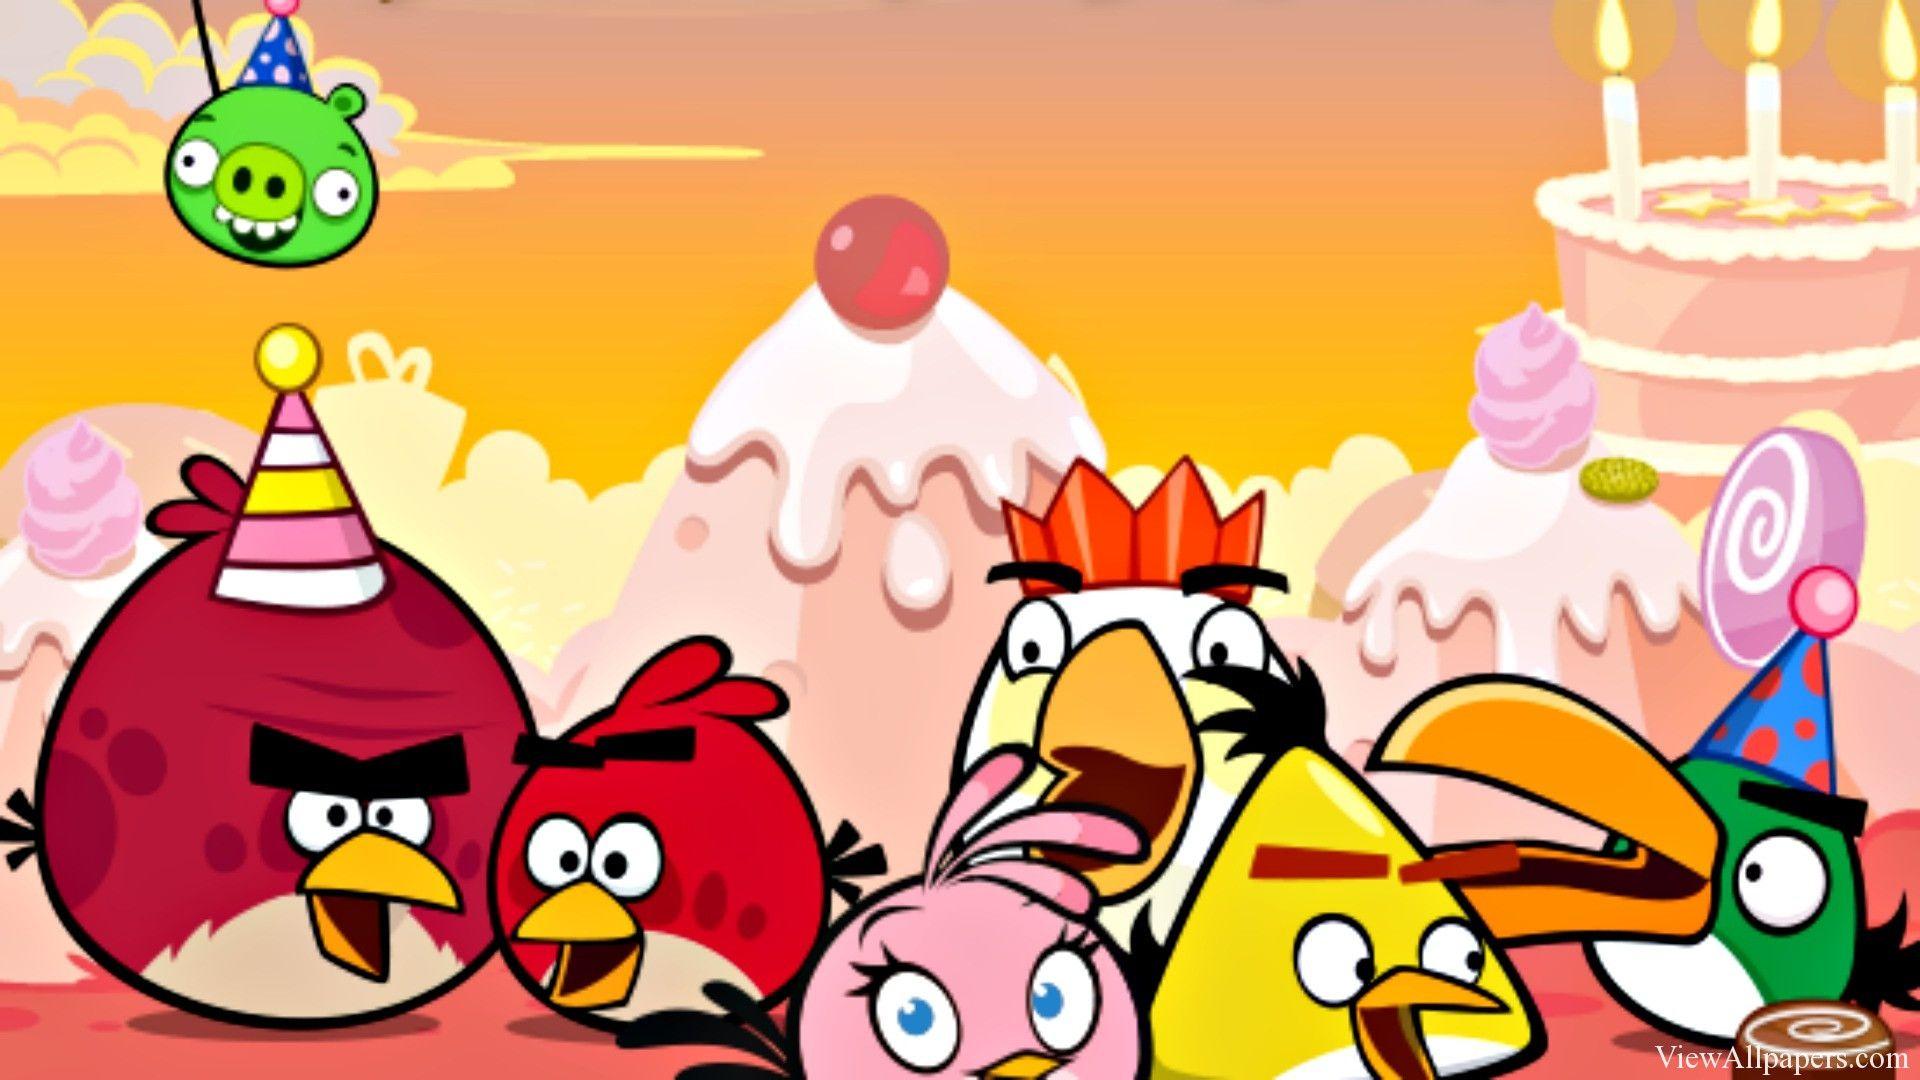 Wallpaper Angry Bird Group 93 Design Of Angry Bird Party